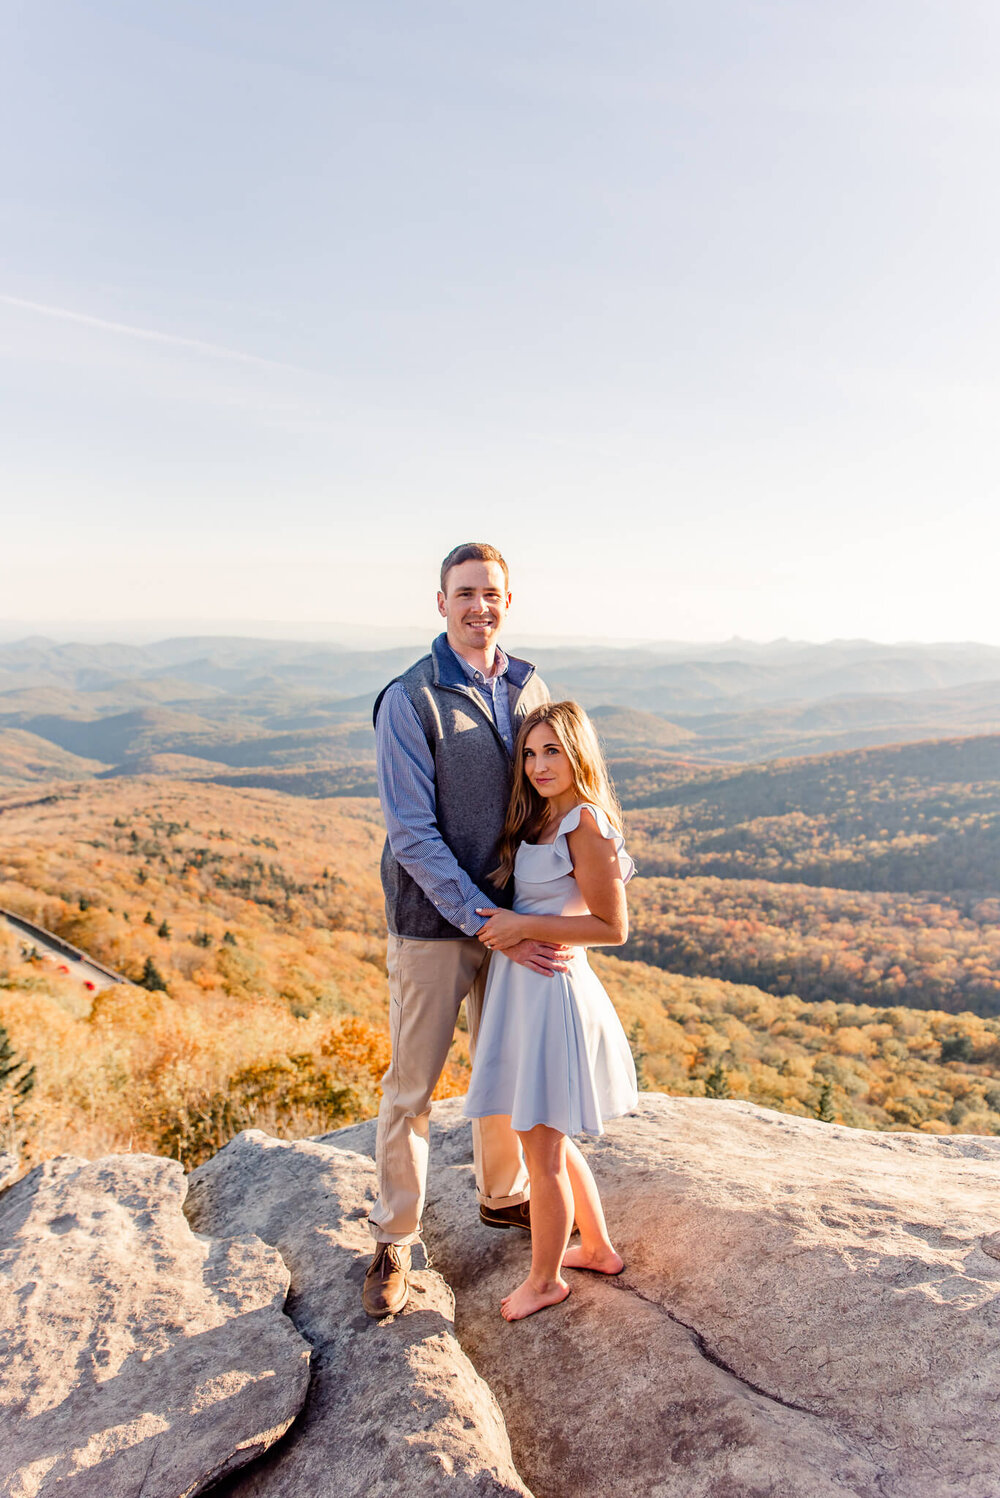 engagement session highlights from nick levine photography on the blue ridge parkway near boone, nc